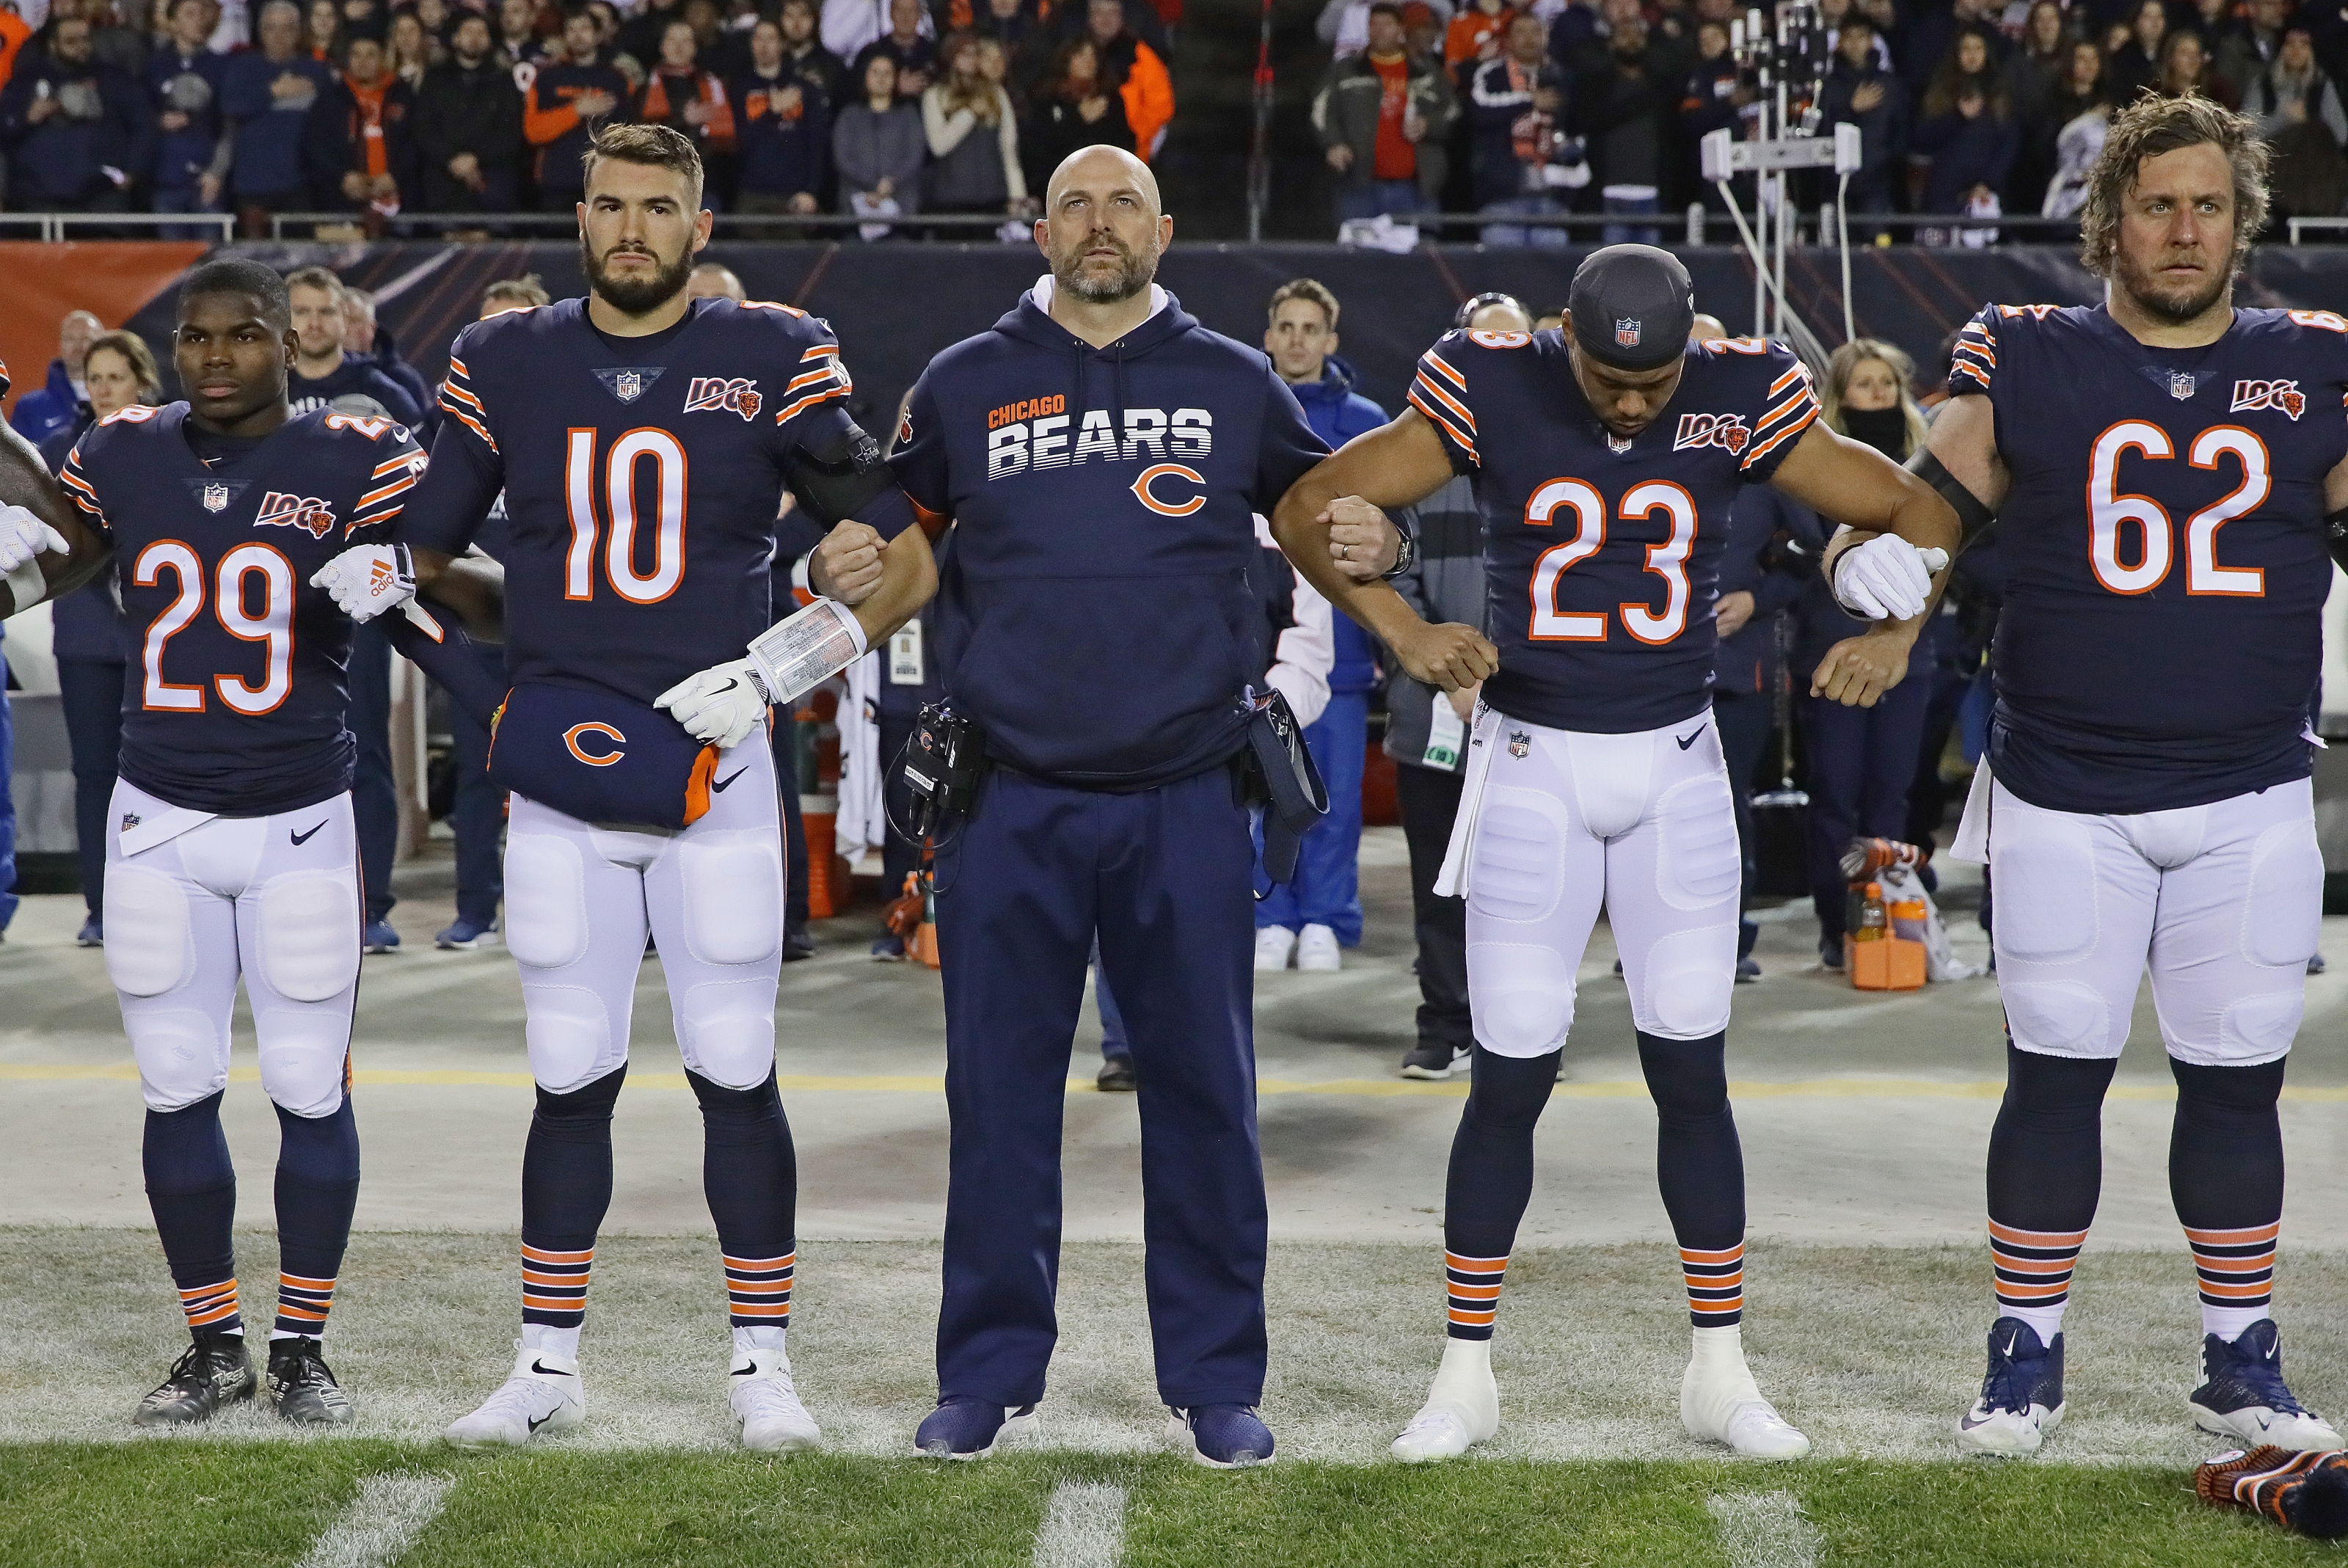 Dave Wannstedt: The Bears are going to have to throw the ball to win